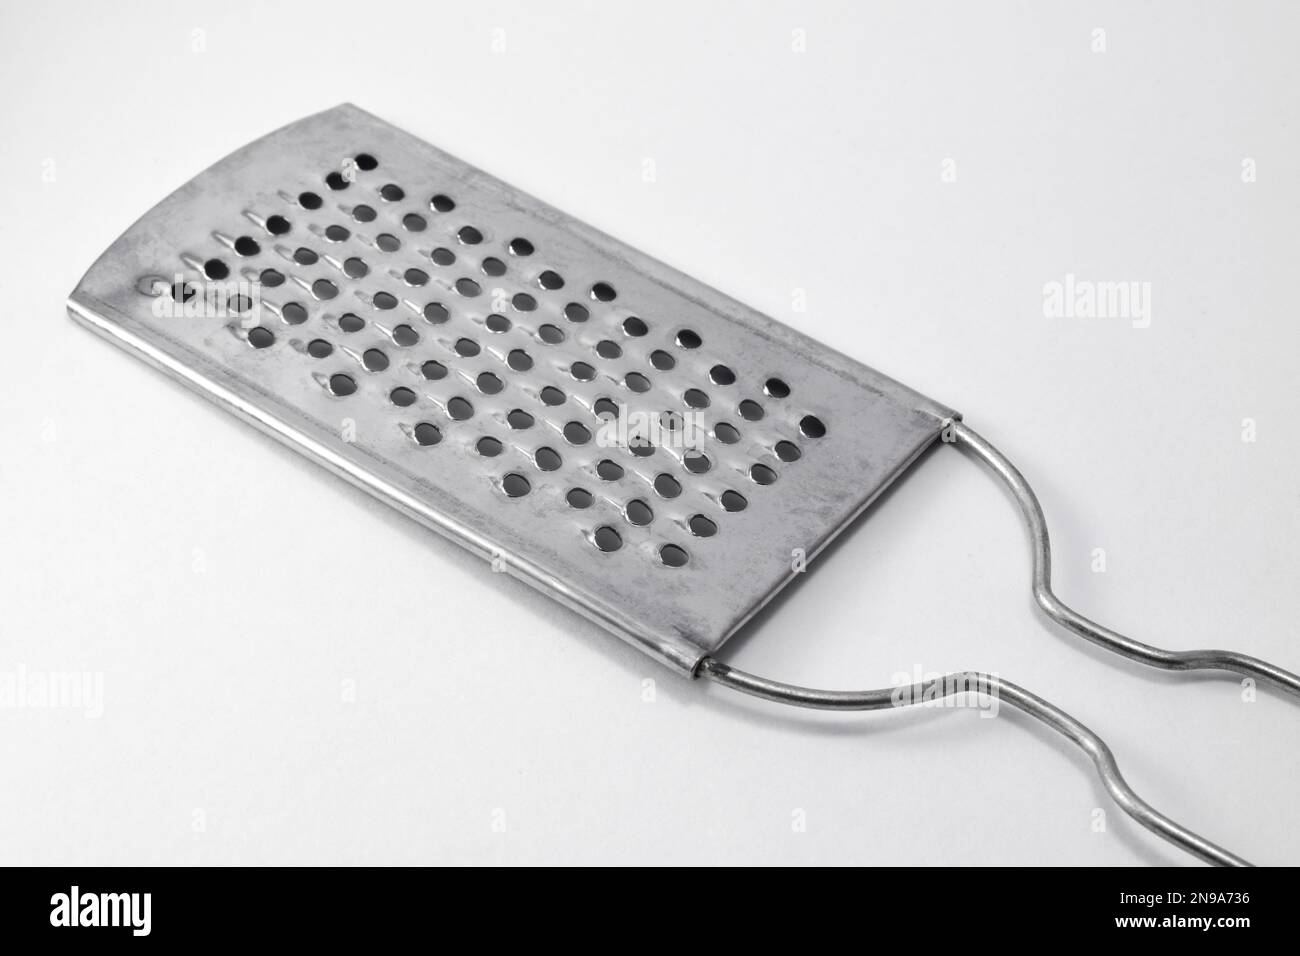 https://c8.alamy.com/comp/2N9A736/stainless-steel-cheese-grater-isolated-on-white-background-2N9A736.jpg